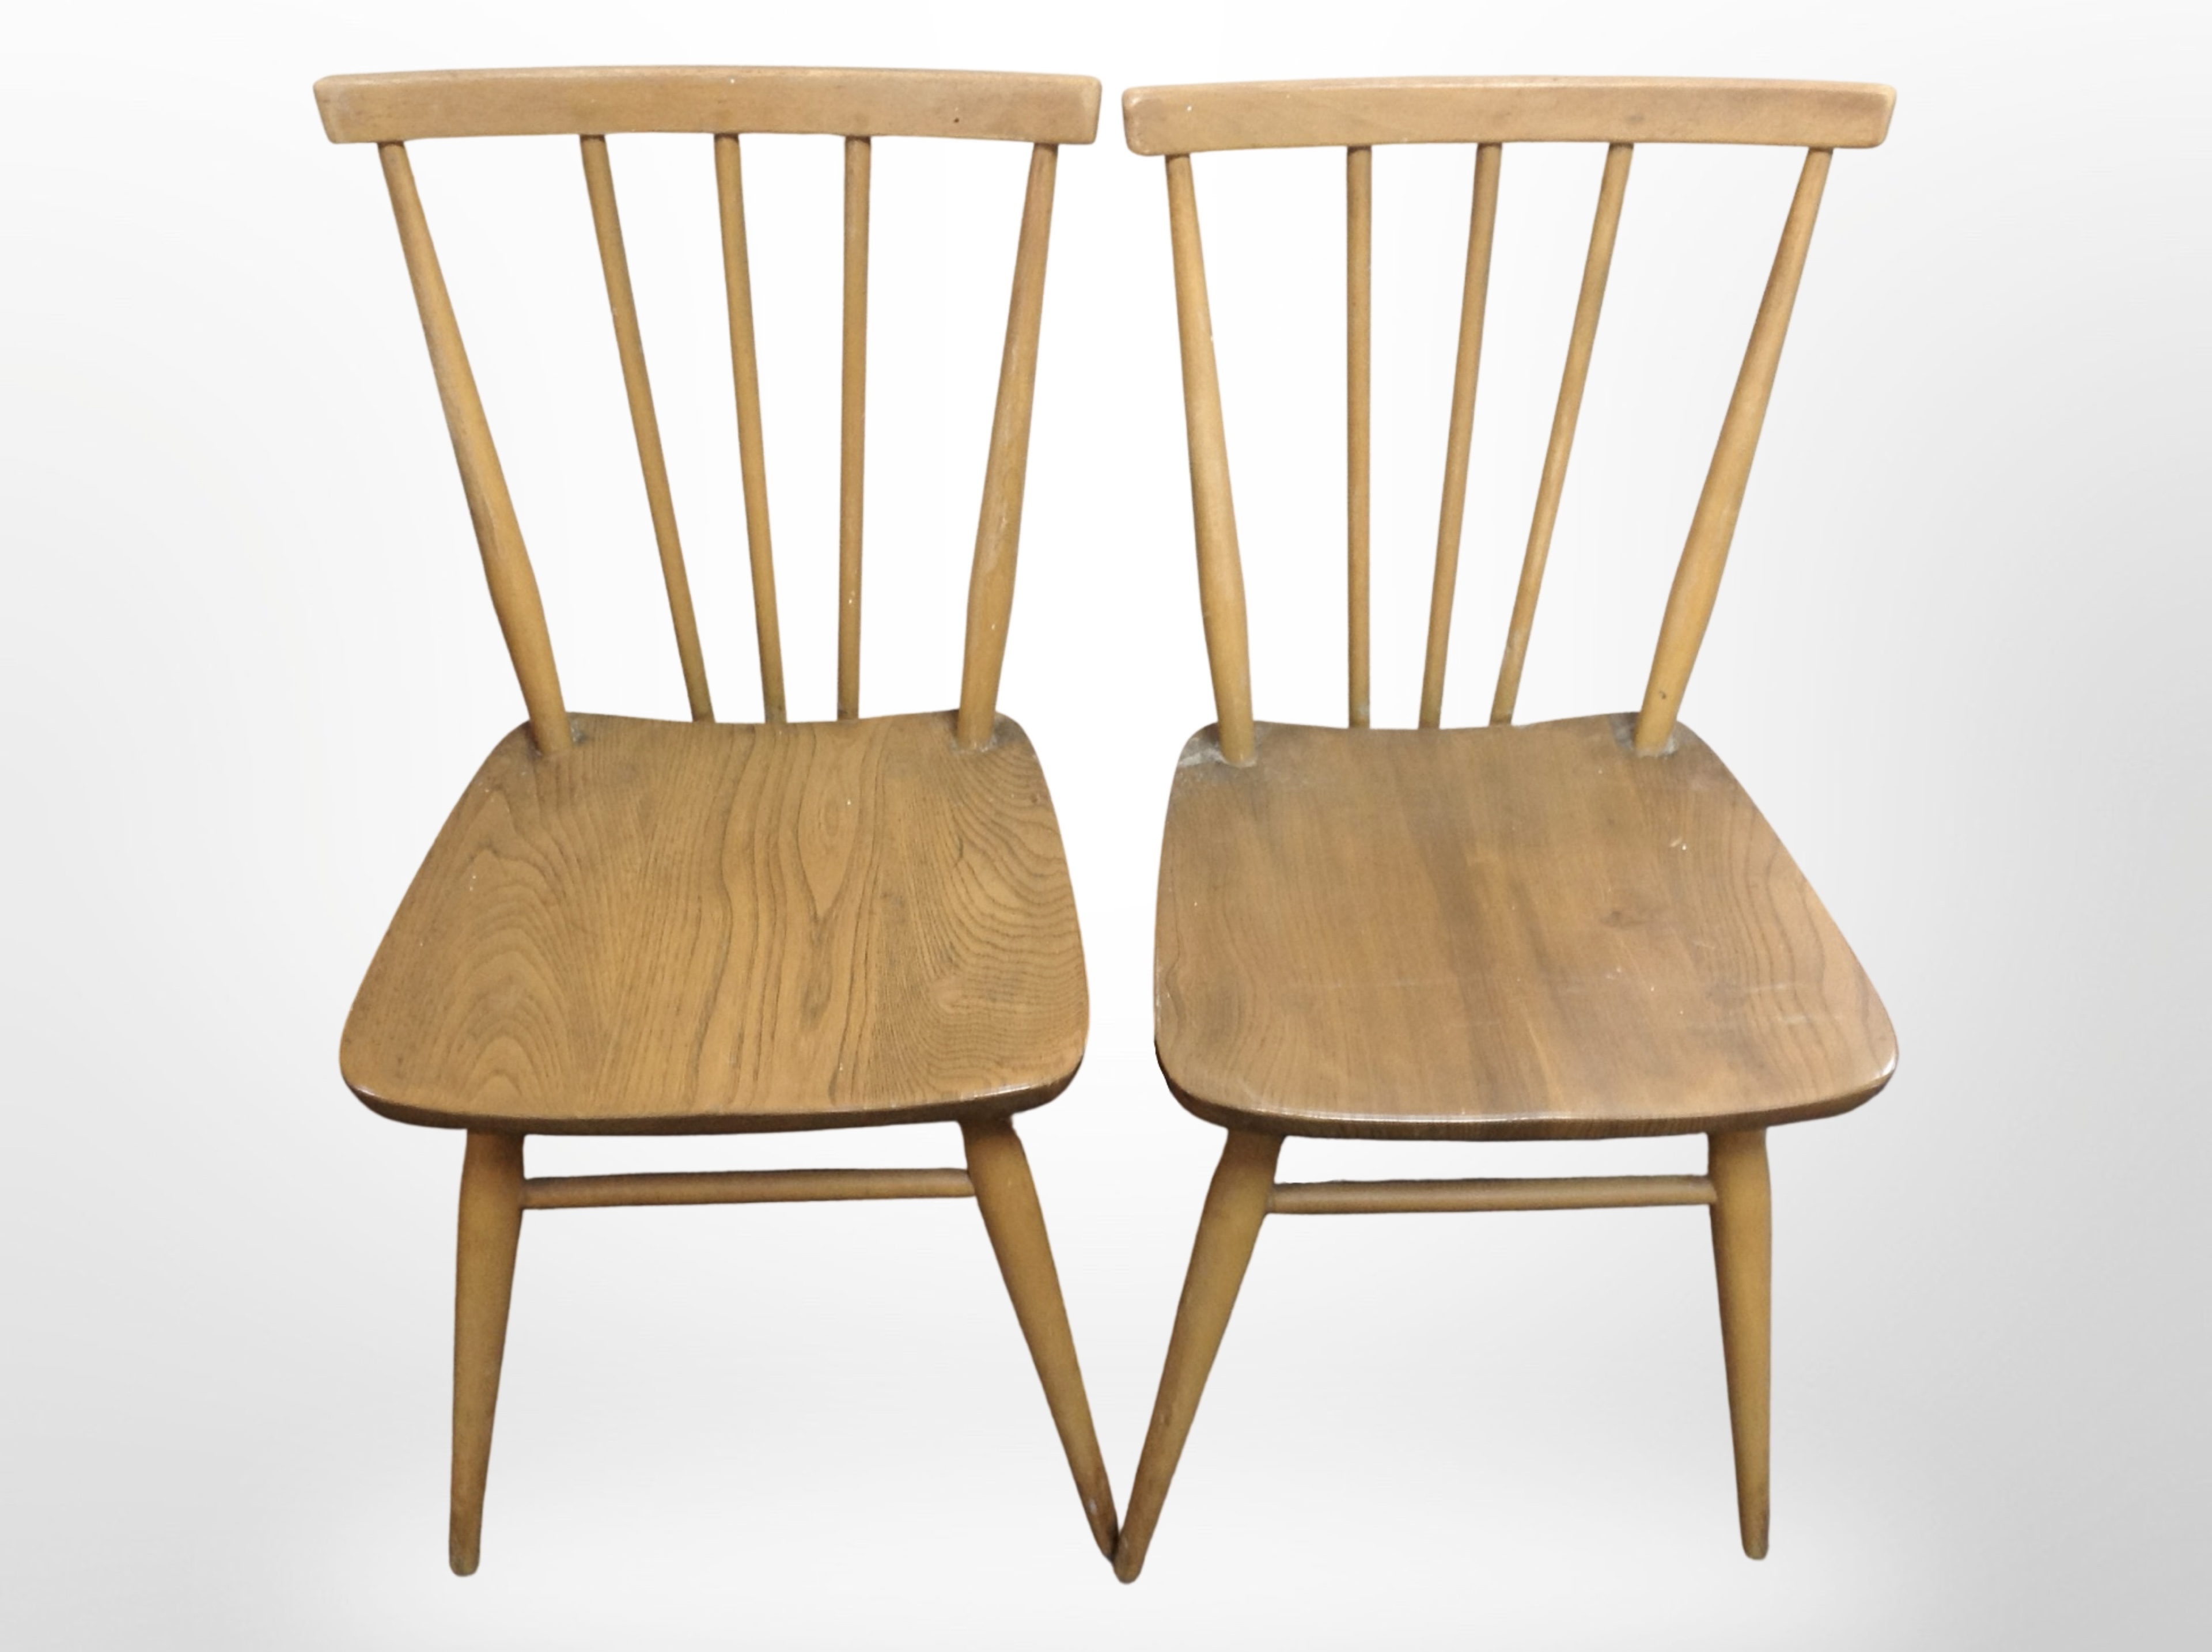 A pair of Ercol elm and beech spindle-back dining chairs.